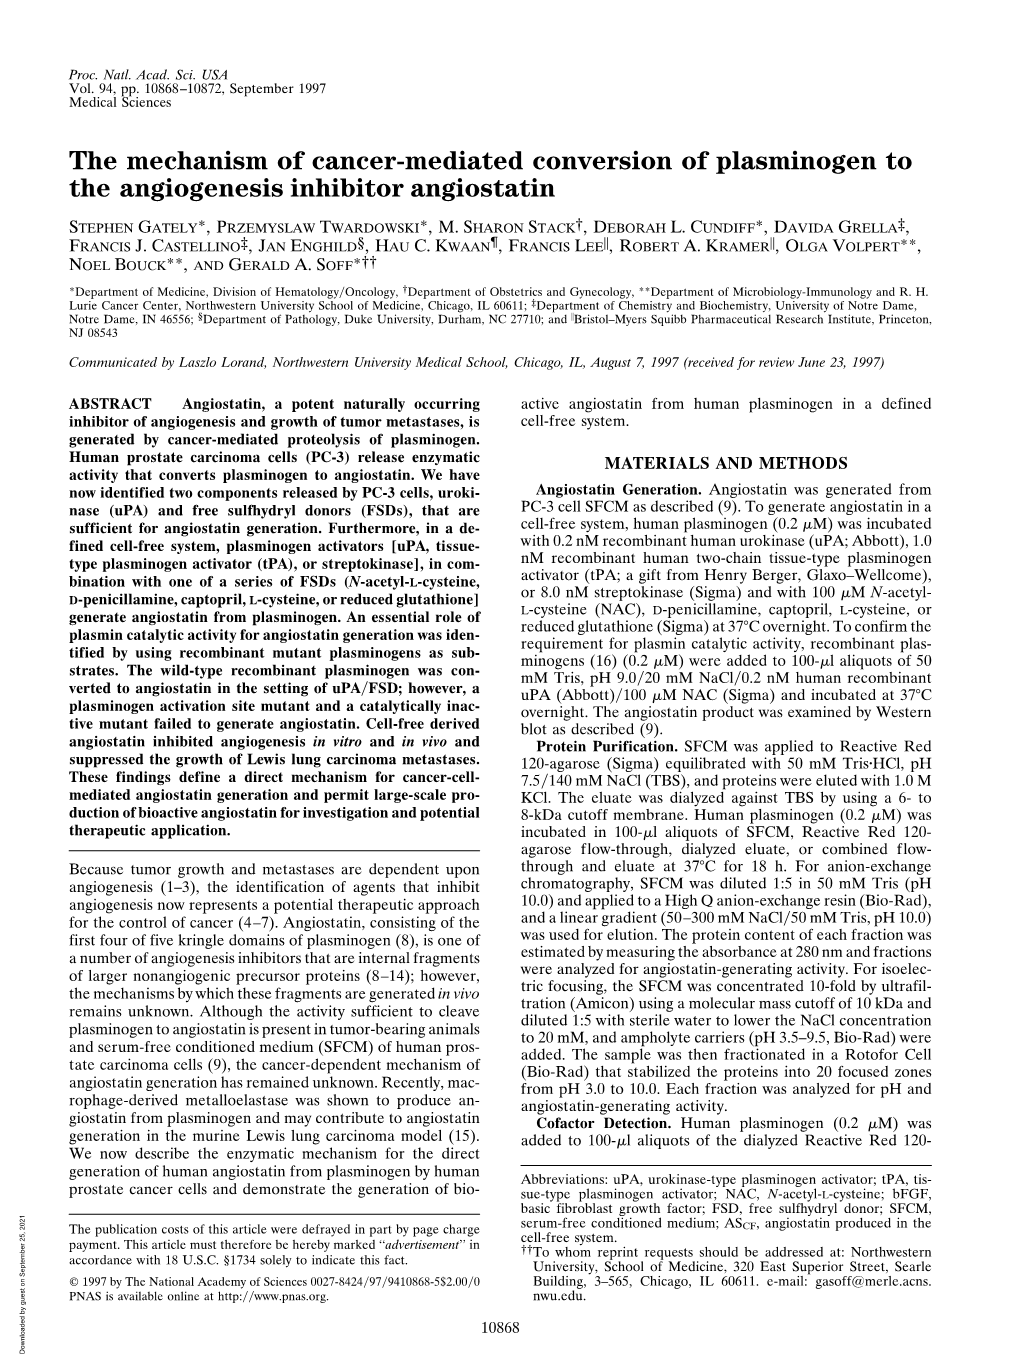 The Mechanism of Cancer-Mediated Conversion of Plasminogen to the Angiogenesis Inhibitor Angiostatin